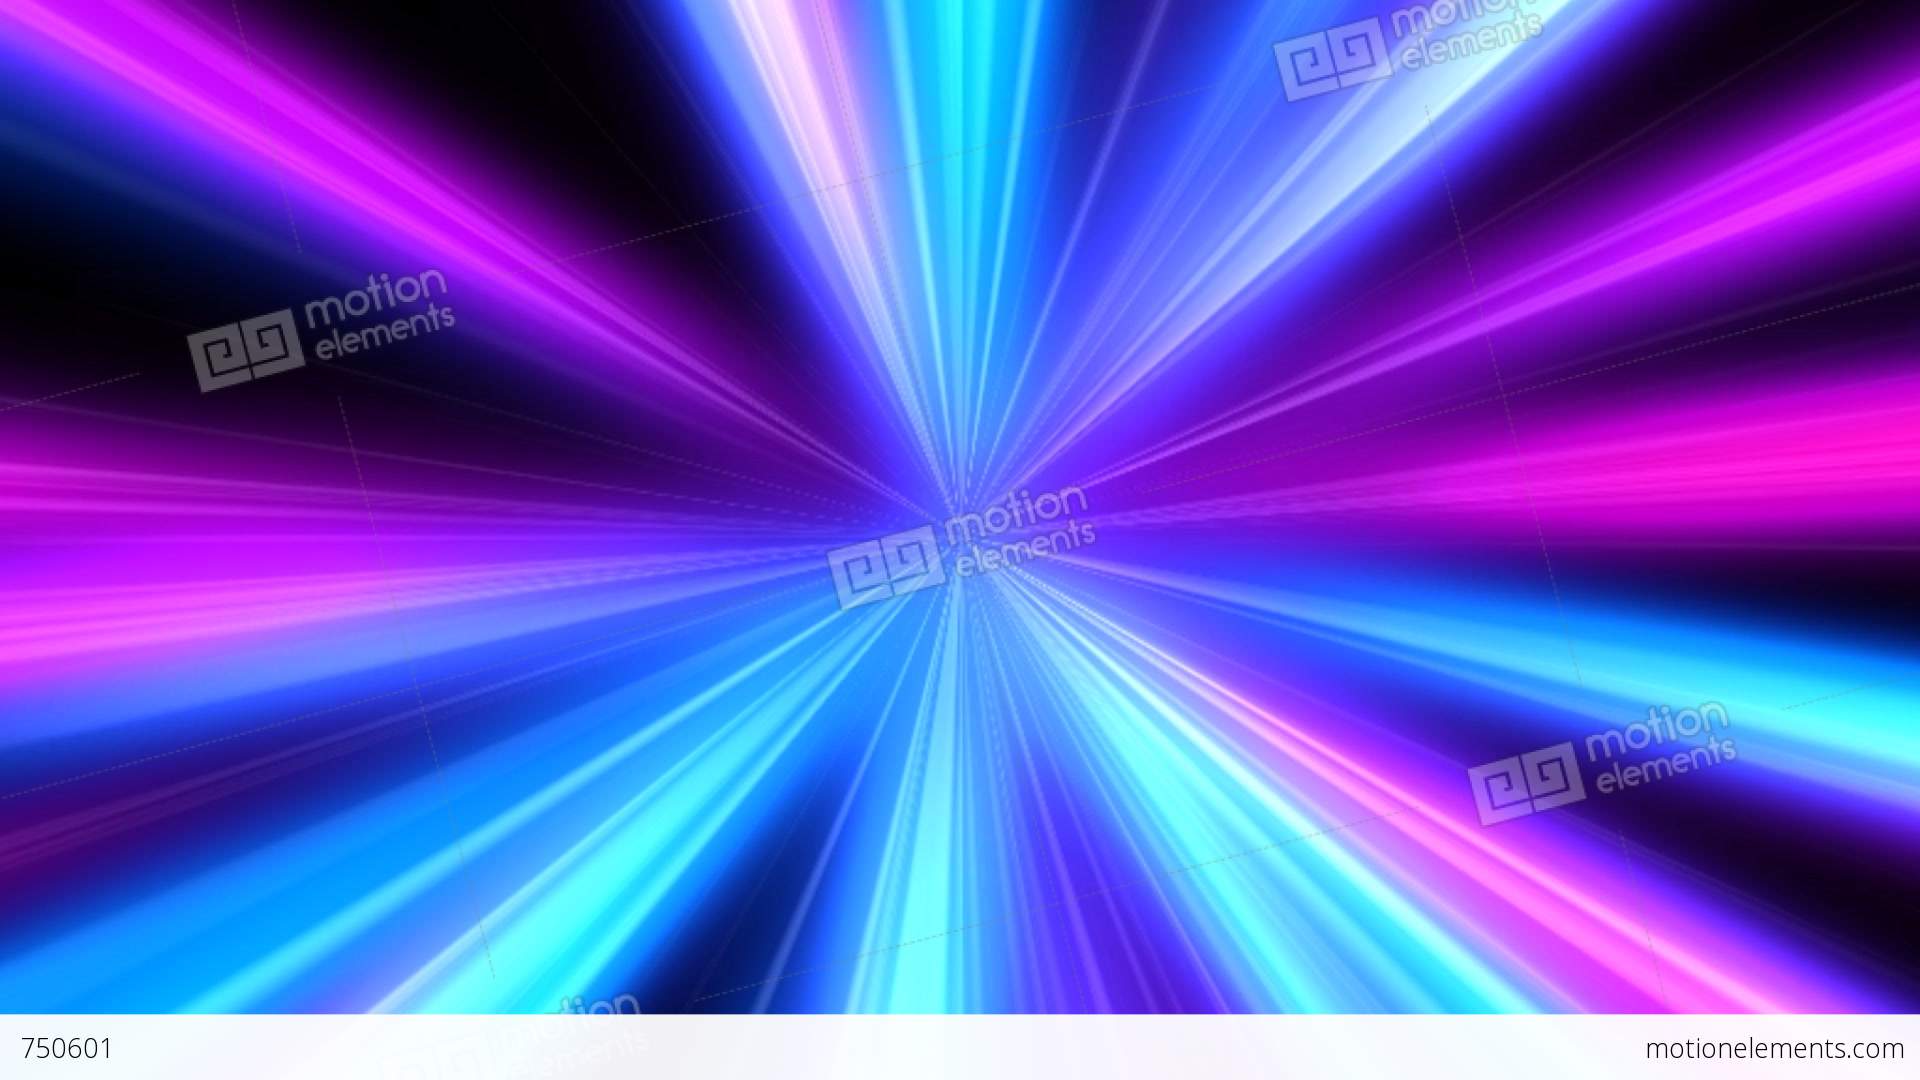 Disco Lights Background Pictures To Pin On Pinterest - Animated Disco Lights Background , HD Wallpaper & Backgrounds